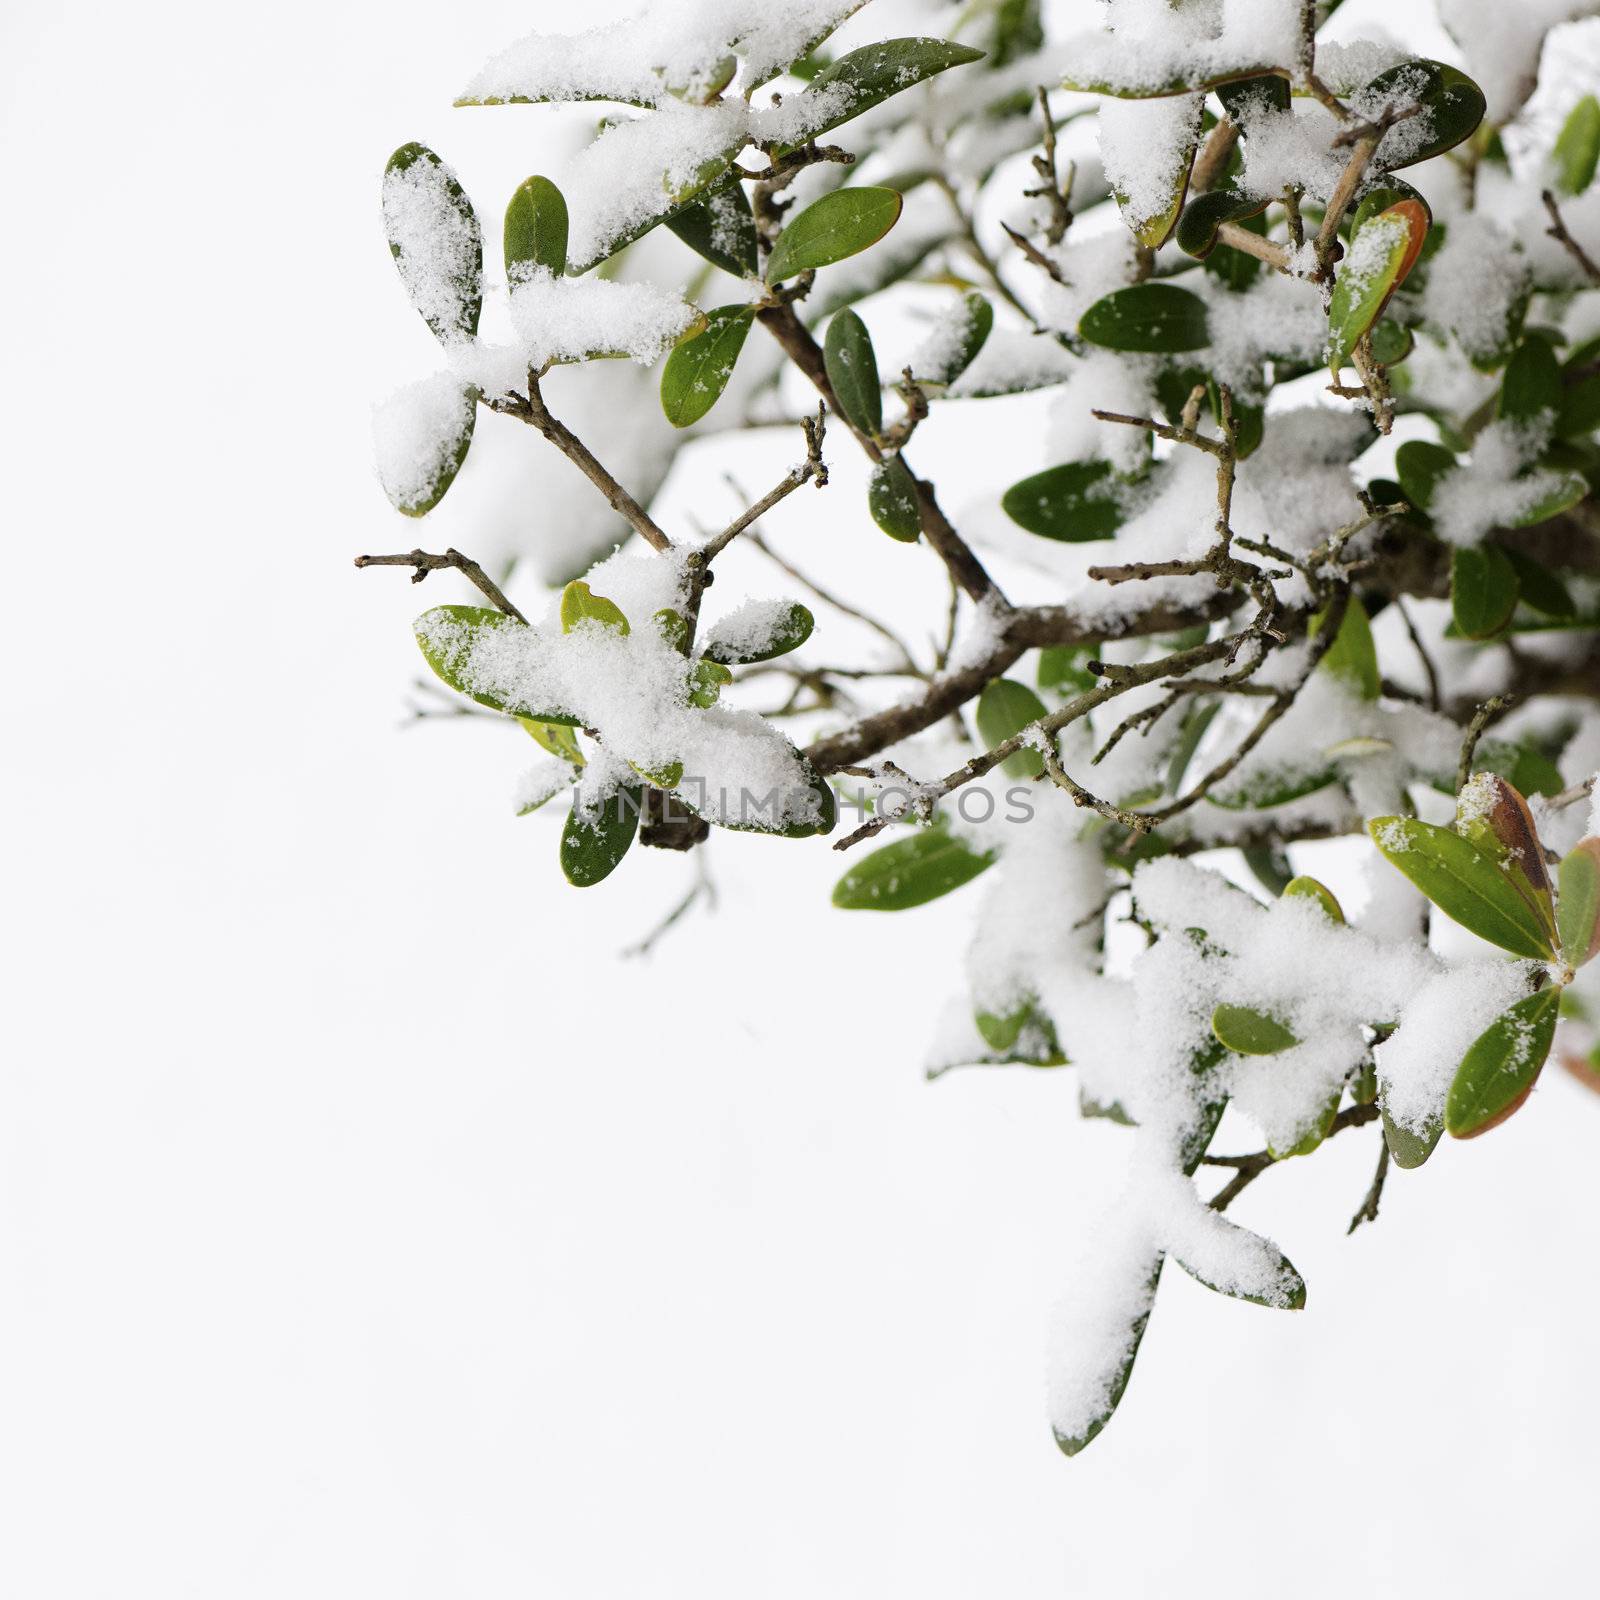 Detail of an olive tree covered by snow